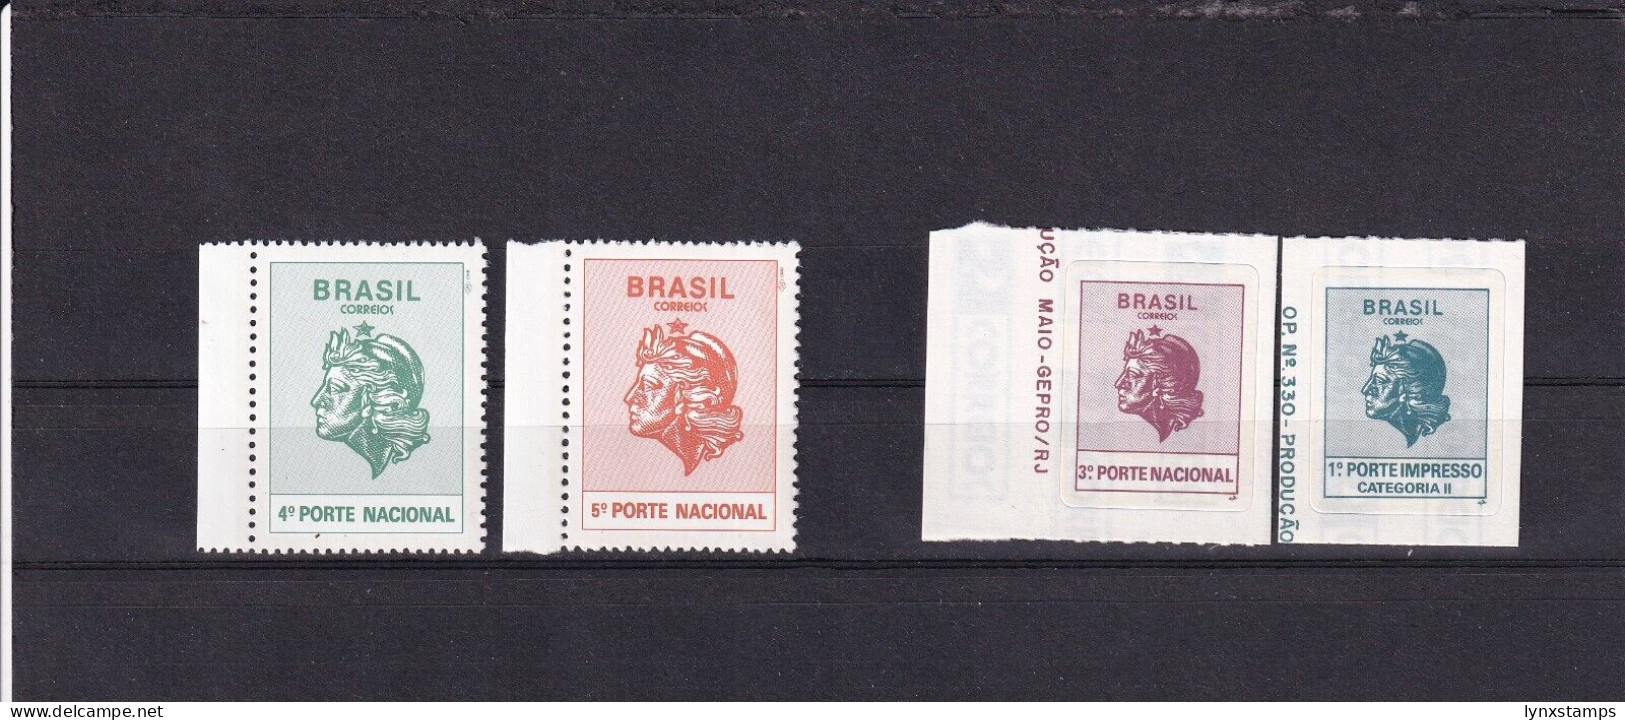 SA06 Brazil 1994 Stamps With No Value Expressed, 2 Self-adhesive - Unused Stamps